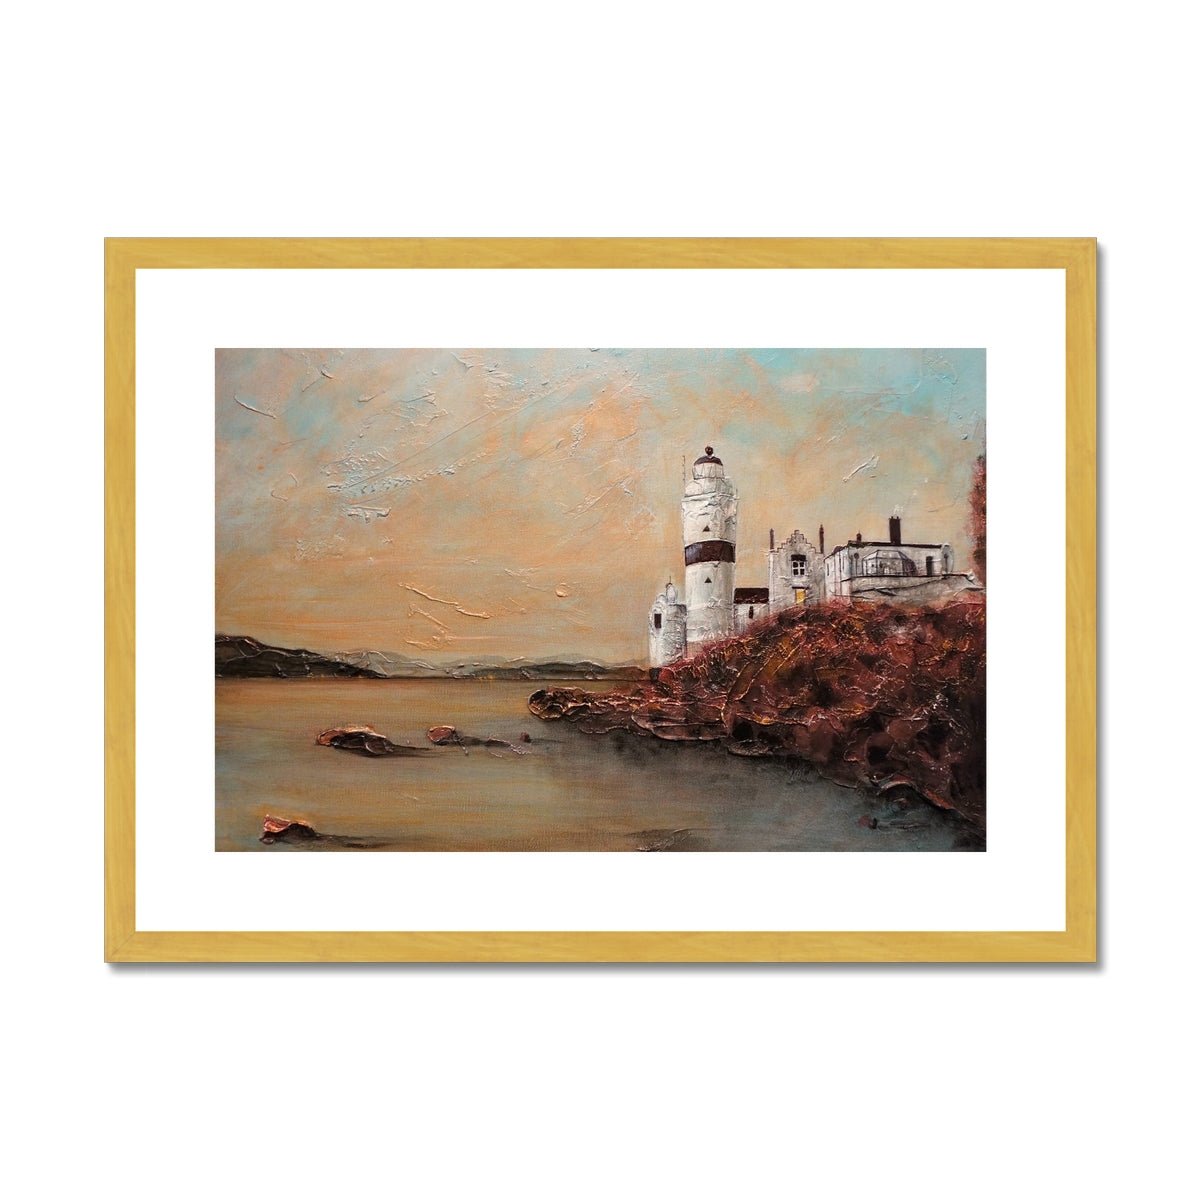 Cloch Lighthouse Dawn Painting | Antique Framed & Mounted Prints From Scotland-Antique Framed & Mounted Prints-River Clyde Art Gallery-A2 Landscape-Gold Frame-Paintings, Prints, Homeware, Art Gifts From Scotland By Scottish Artist Kevin Hunter